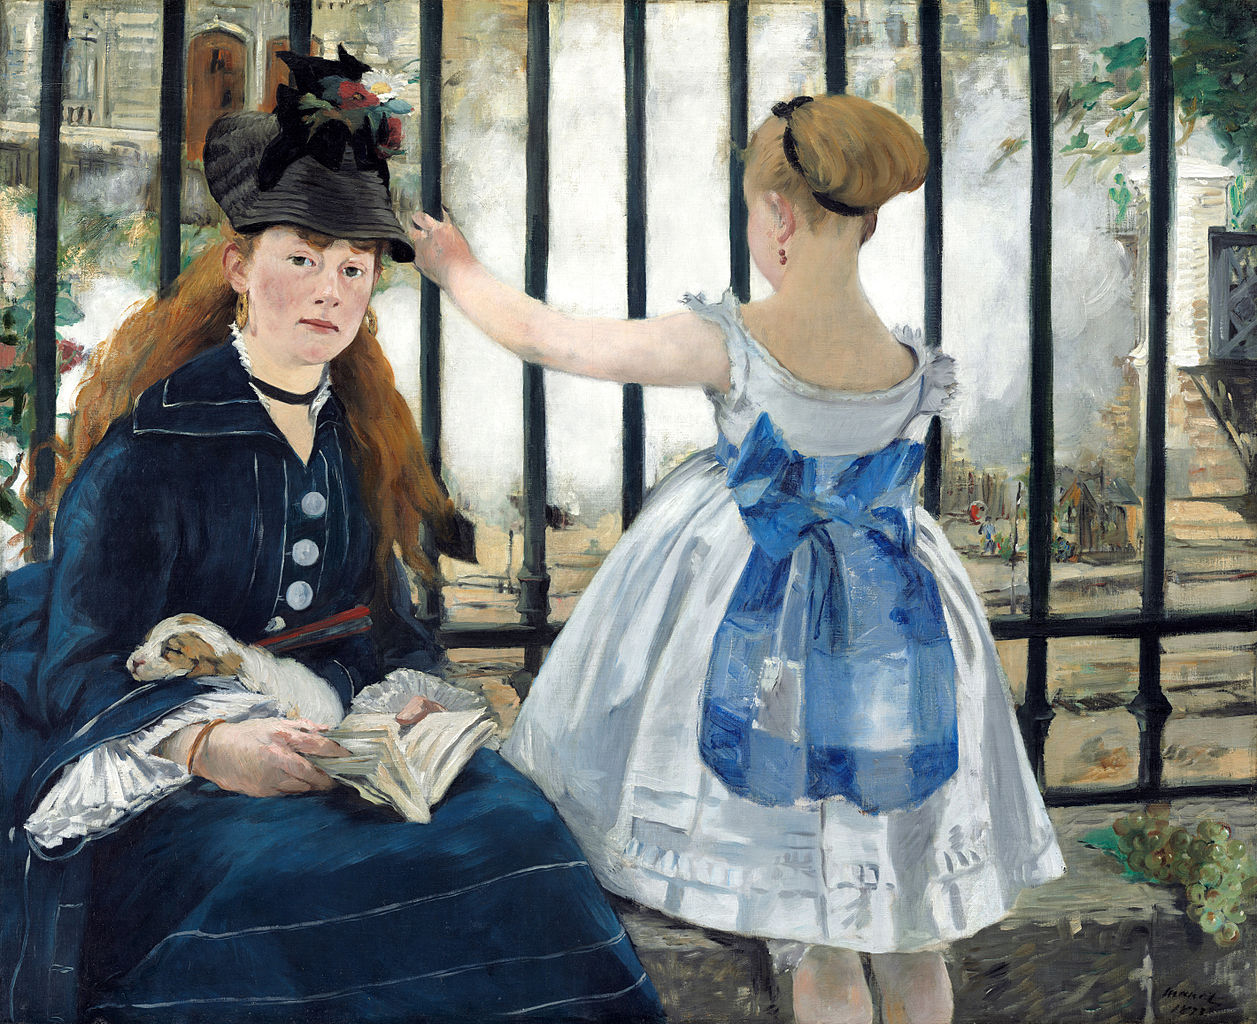 The Railway by Édouard Manet - 1873 - 111.5 × 93.3 cm National Gallery of Art